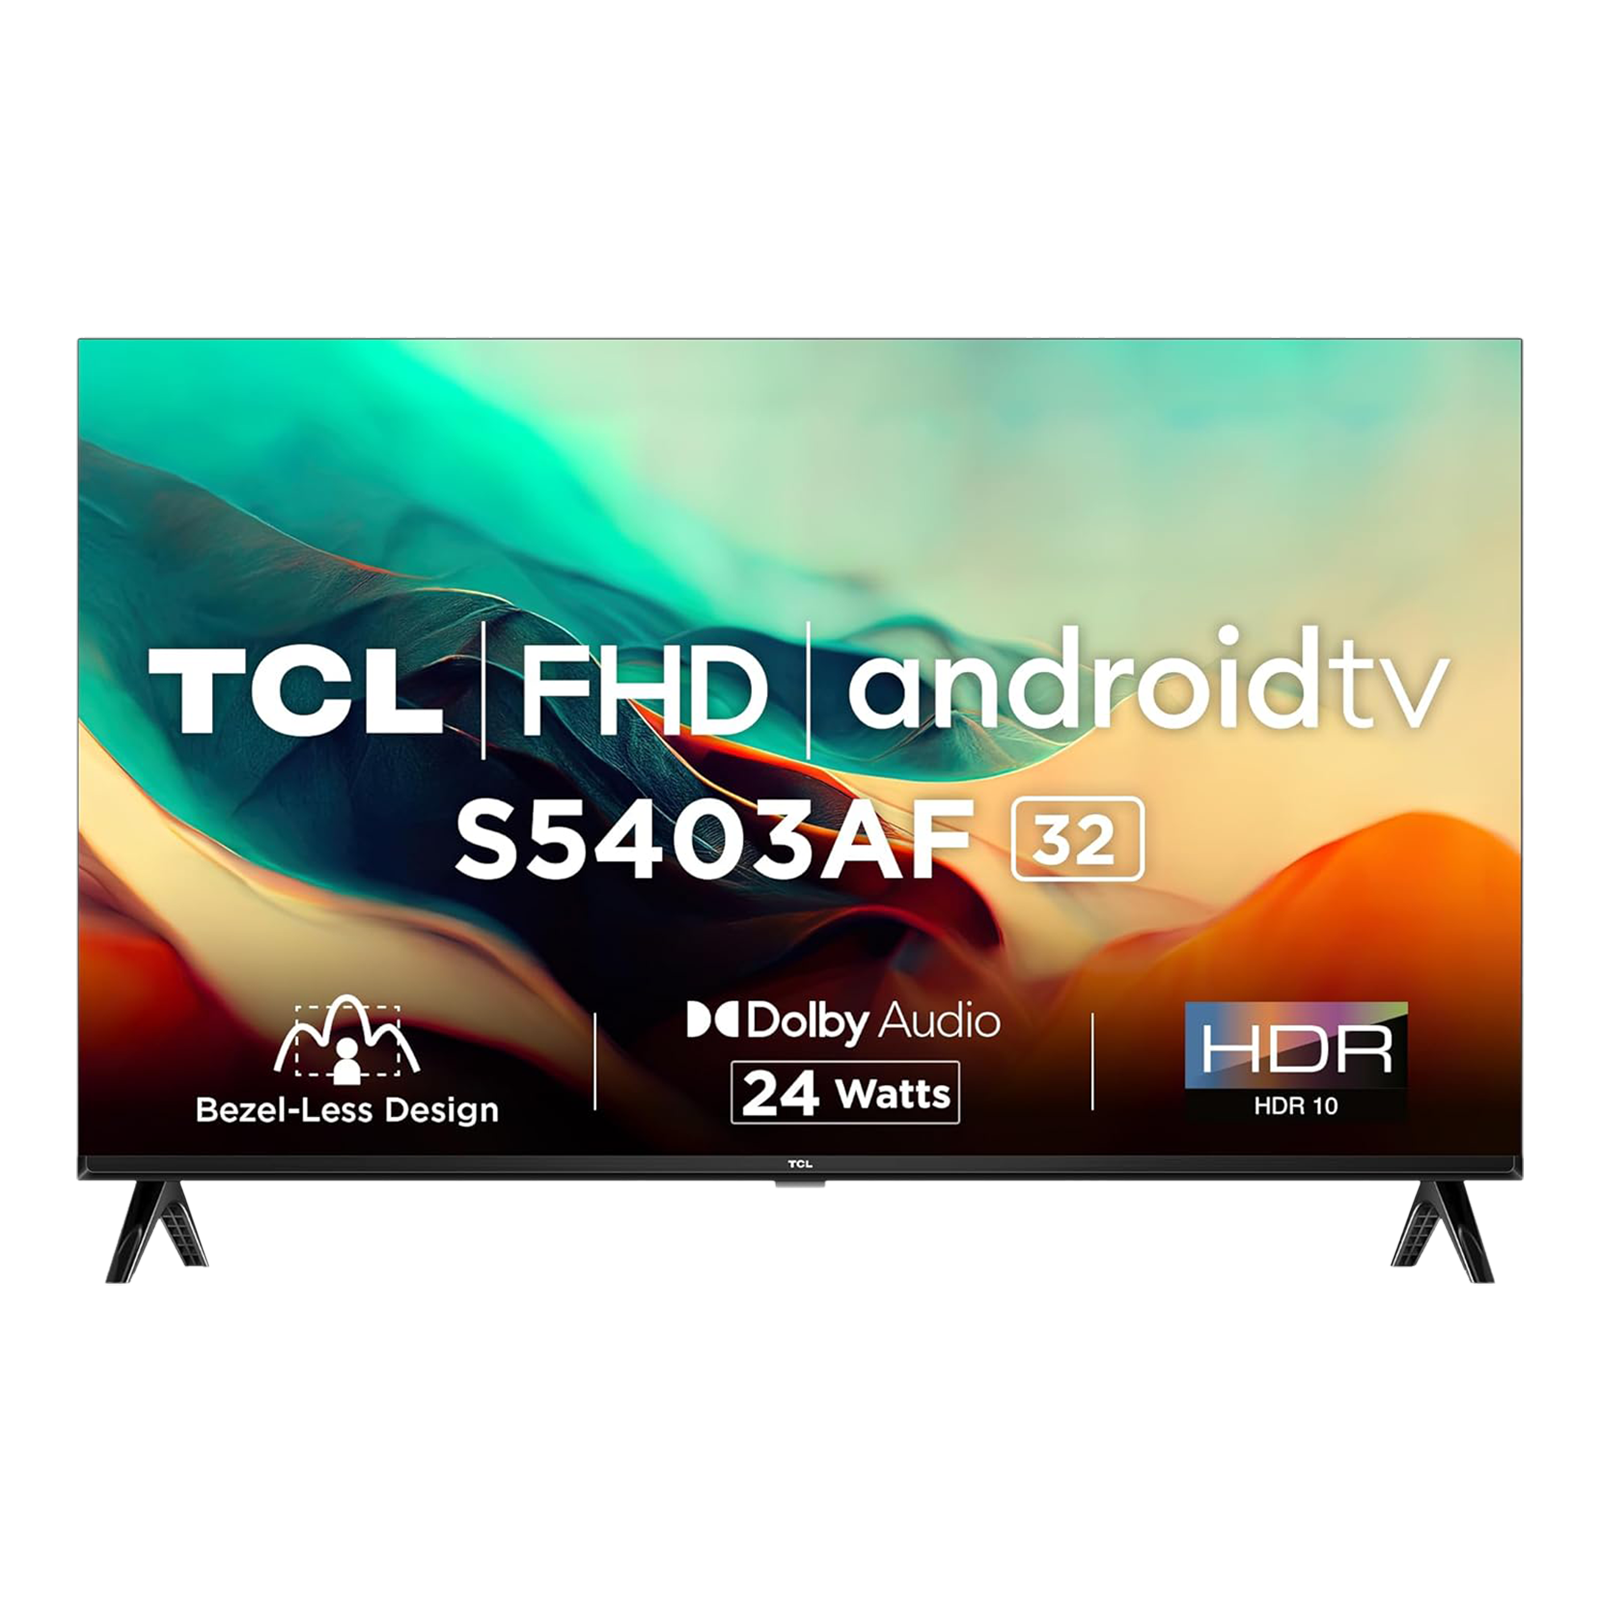 TCL S5403AF 80 cm (32 inch) Full HD LED Smart Android TV with Dolby Audio